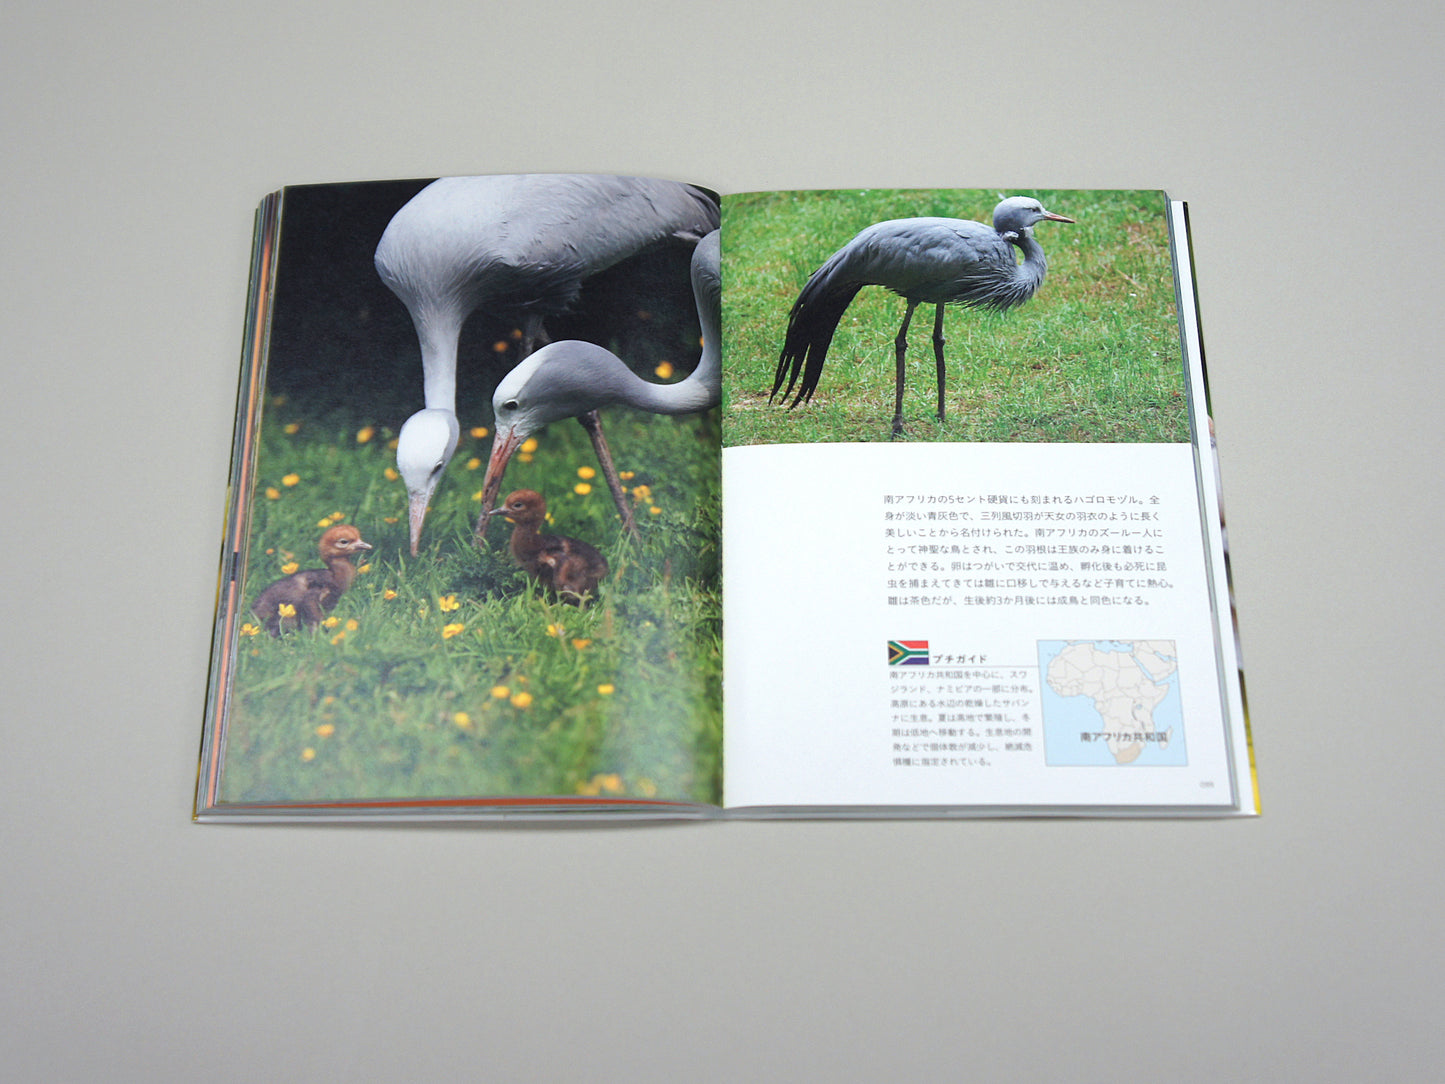 National Birds Around The World by Nomad Books